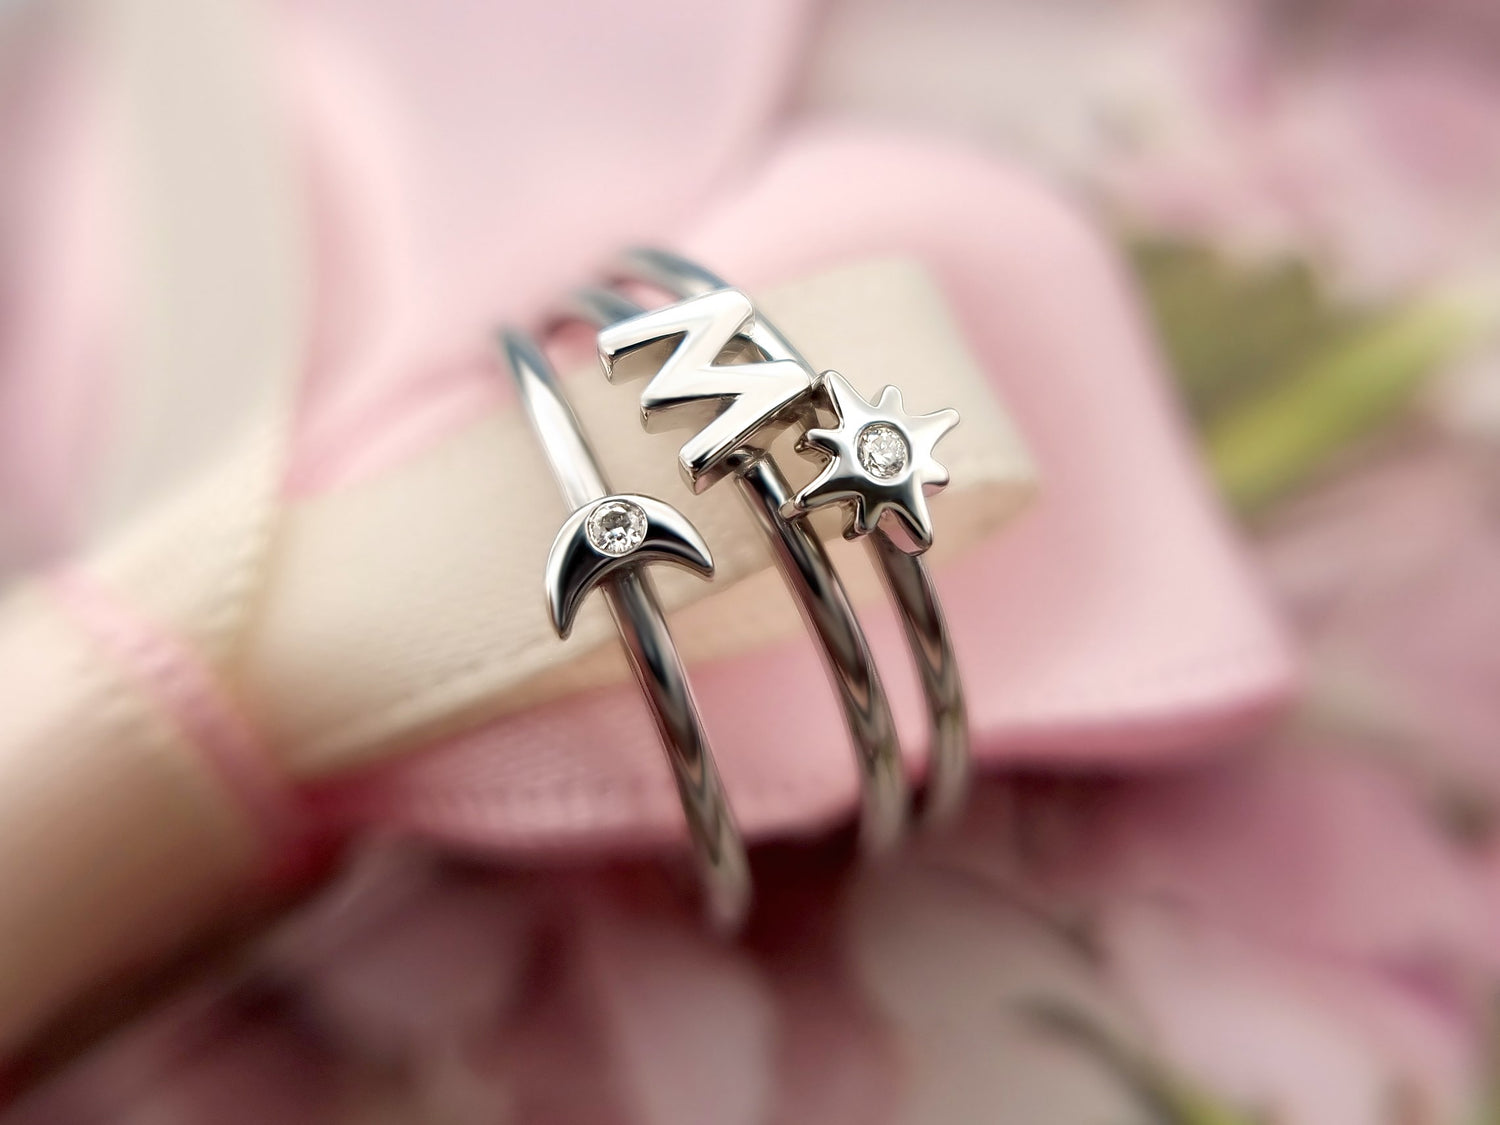 Stackable Rings for Women